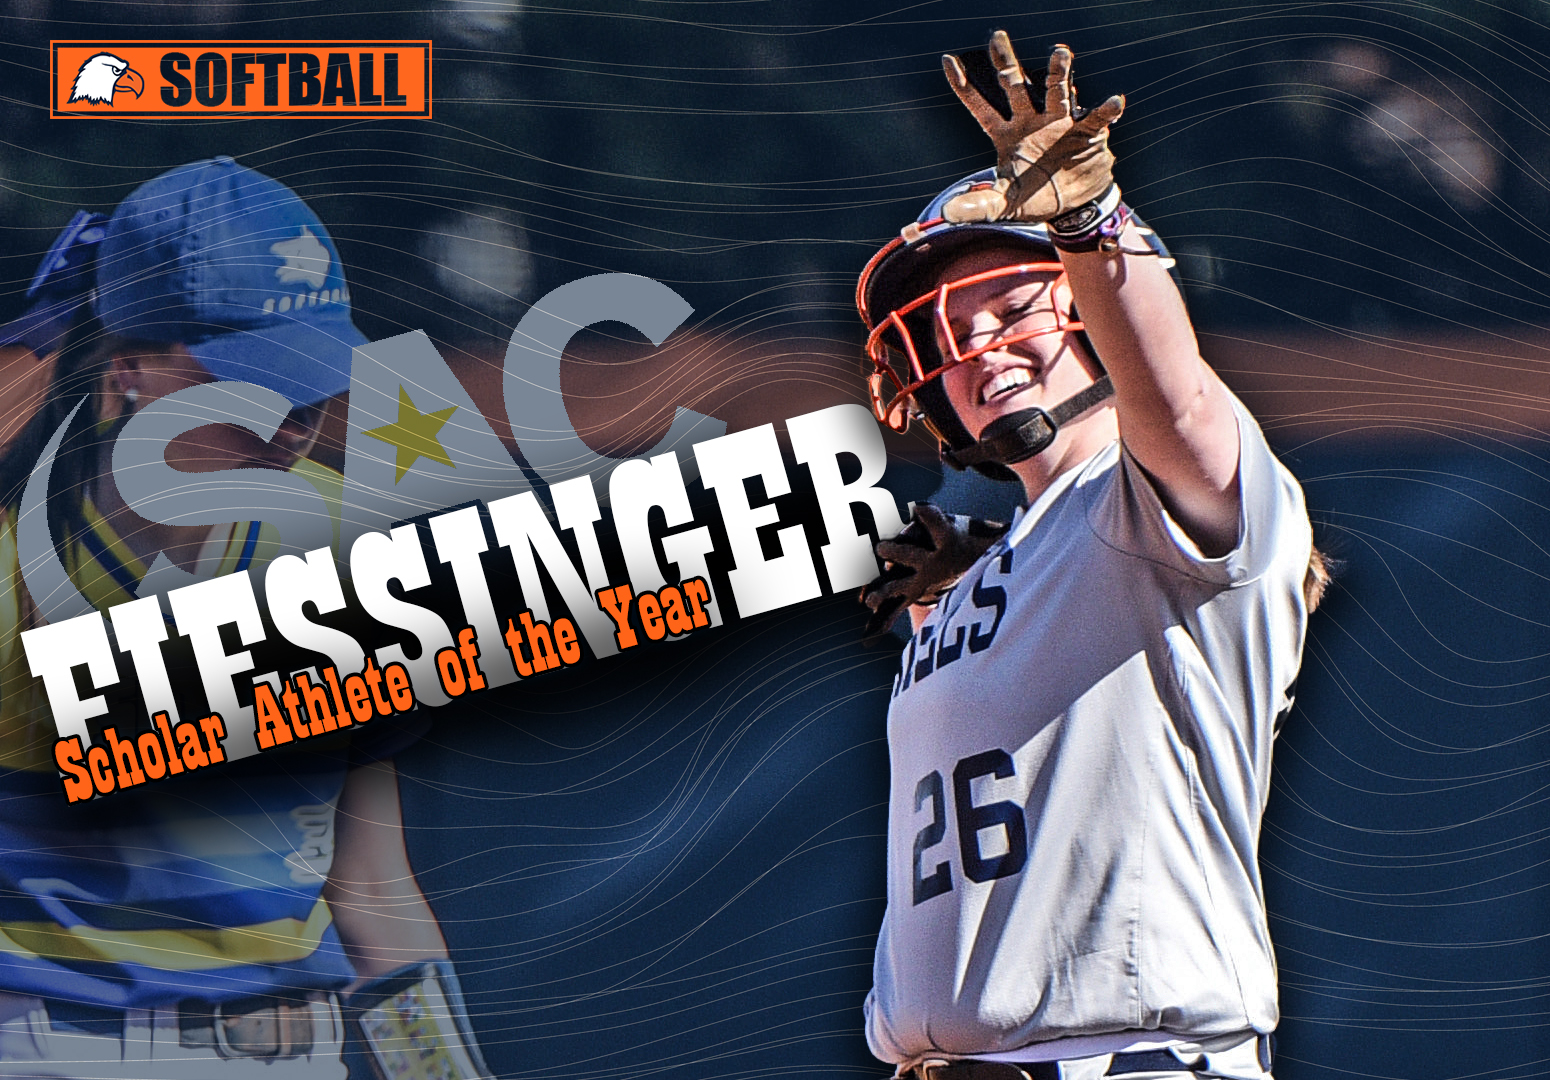 Fiessinger named SAC’s Softball Scholar-Athlete of the Year